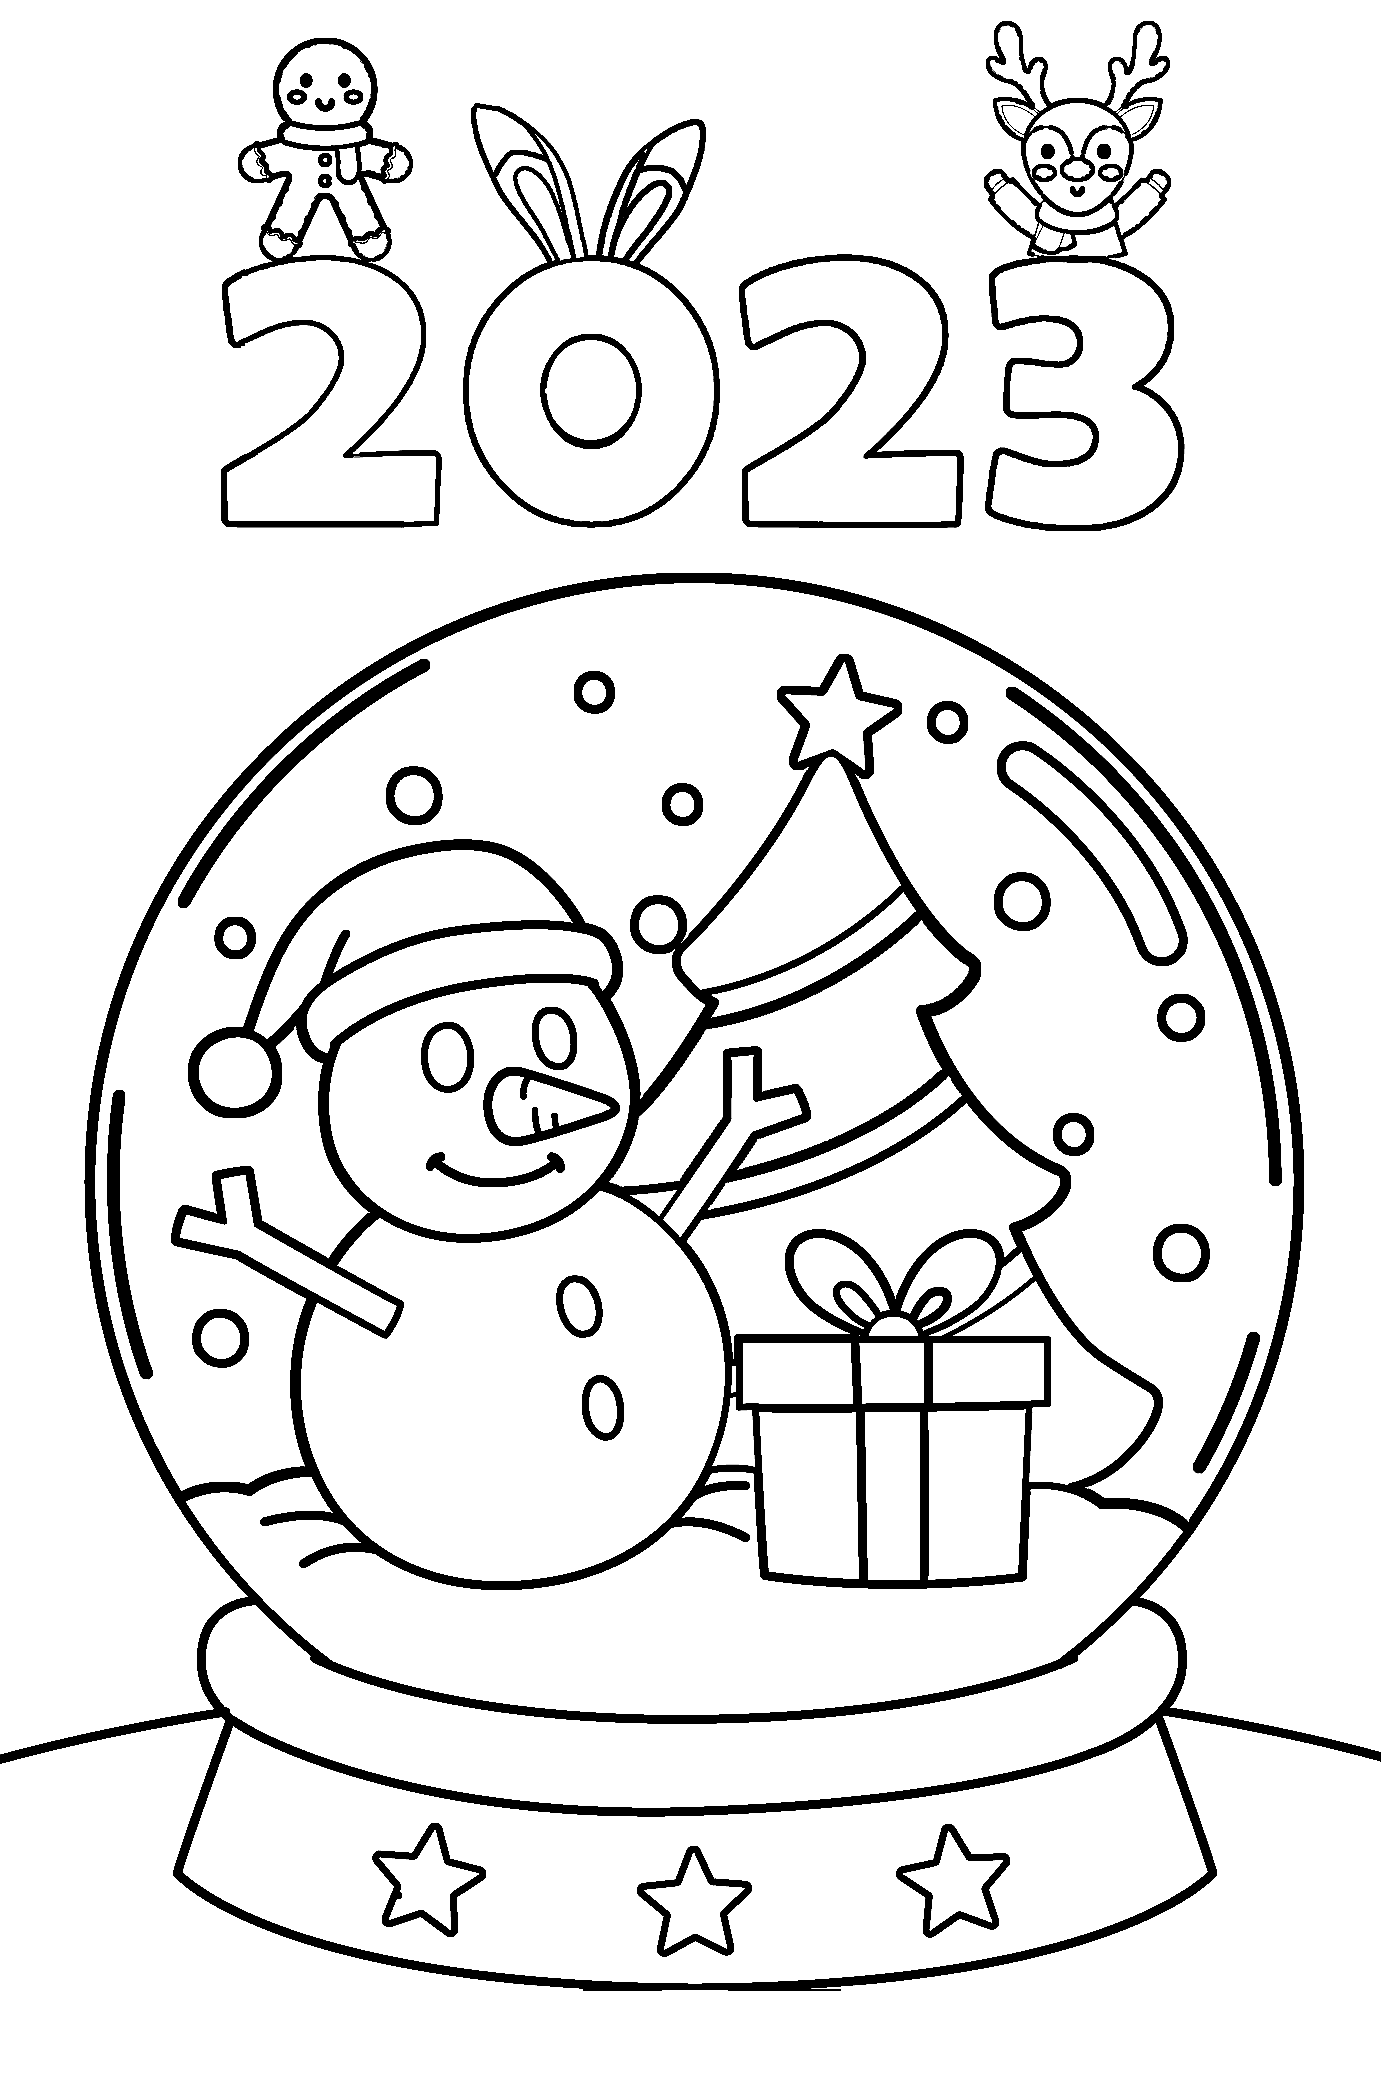 Merry Christmas 2023 Drawing For Kids Coloring Page